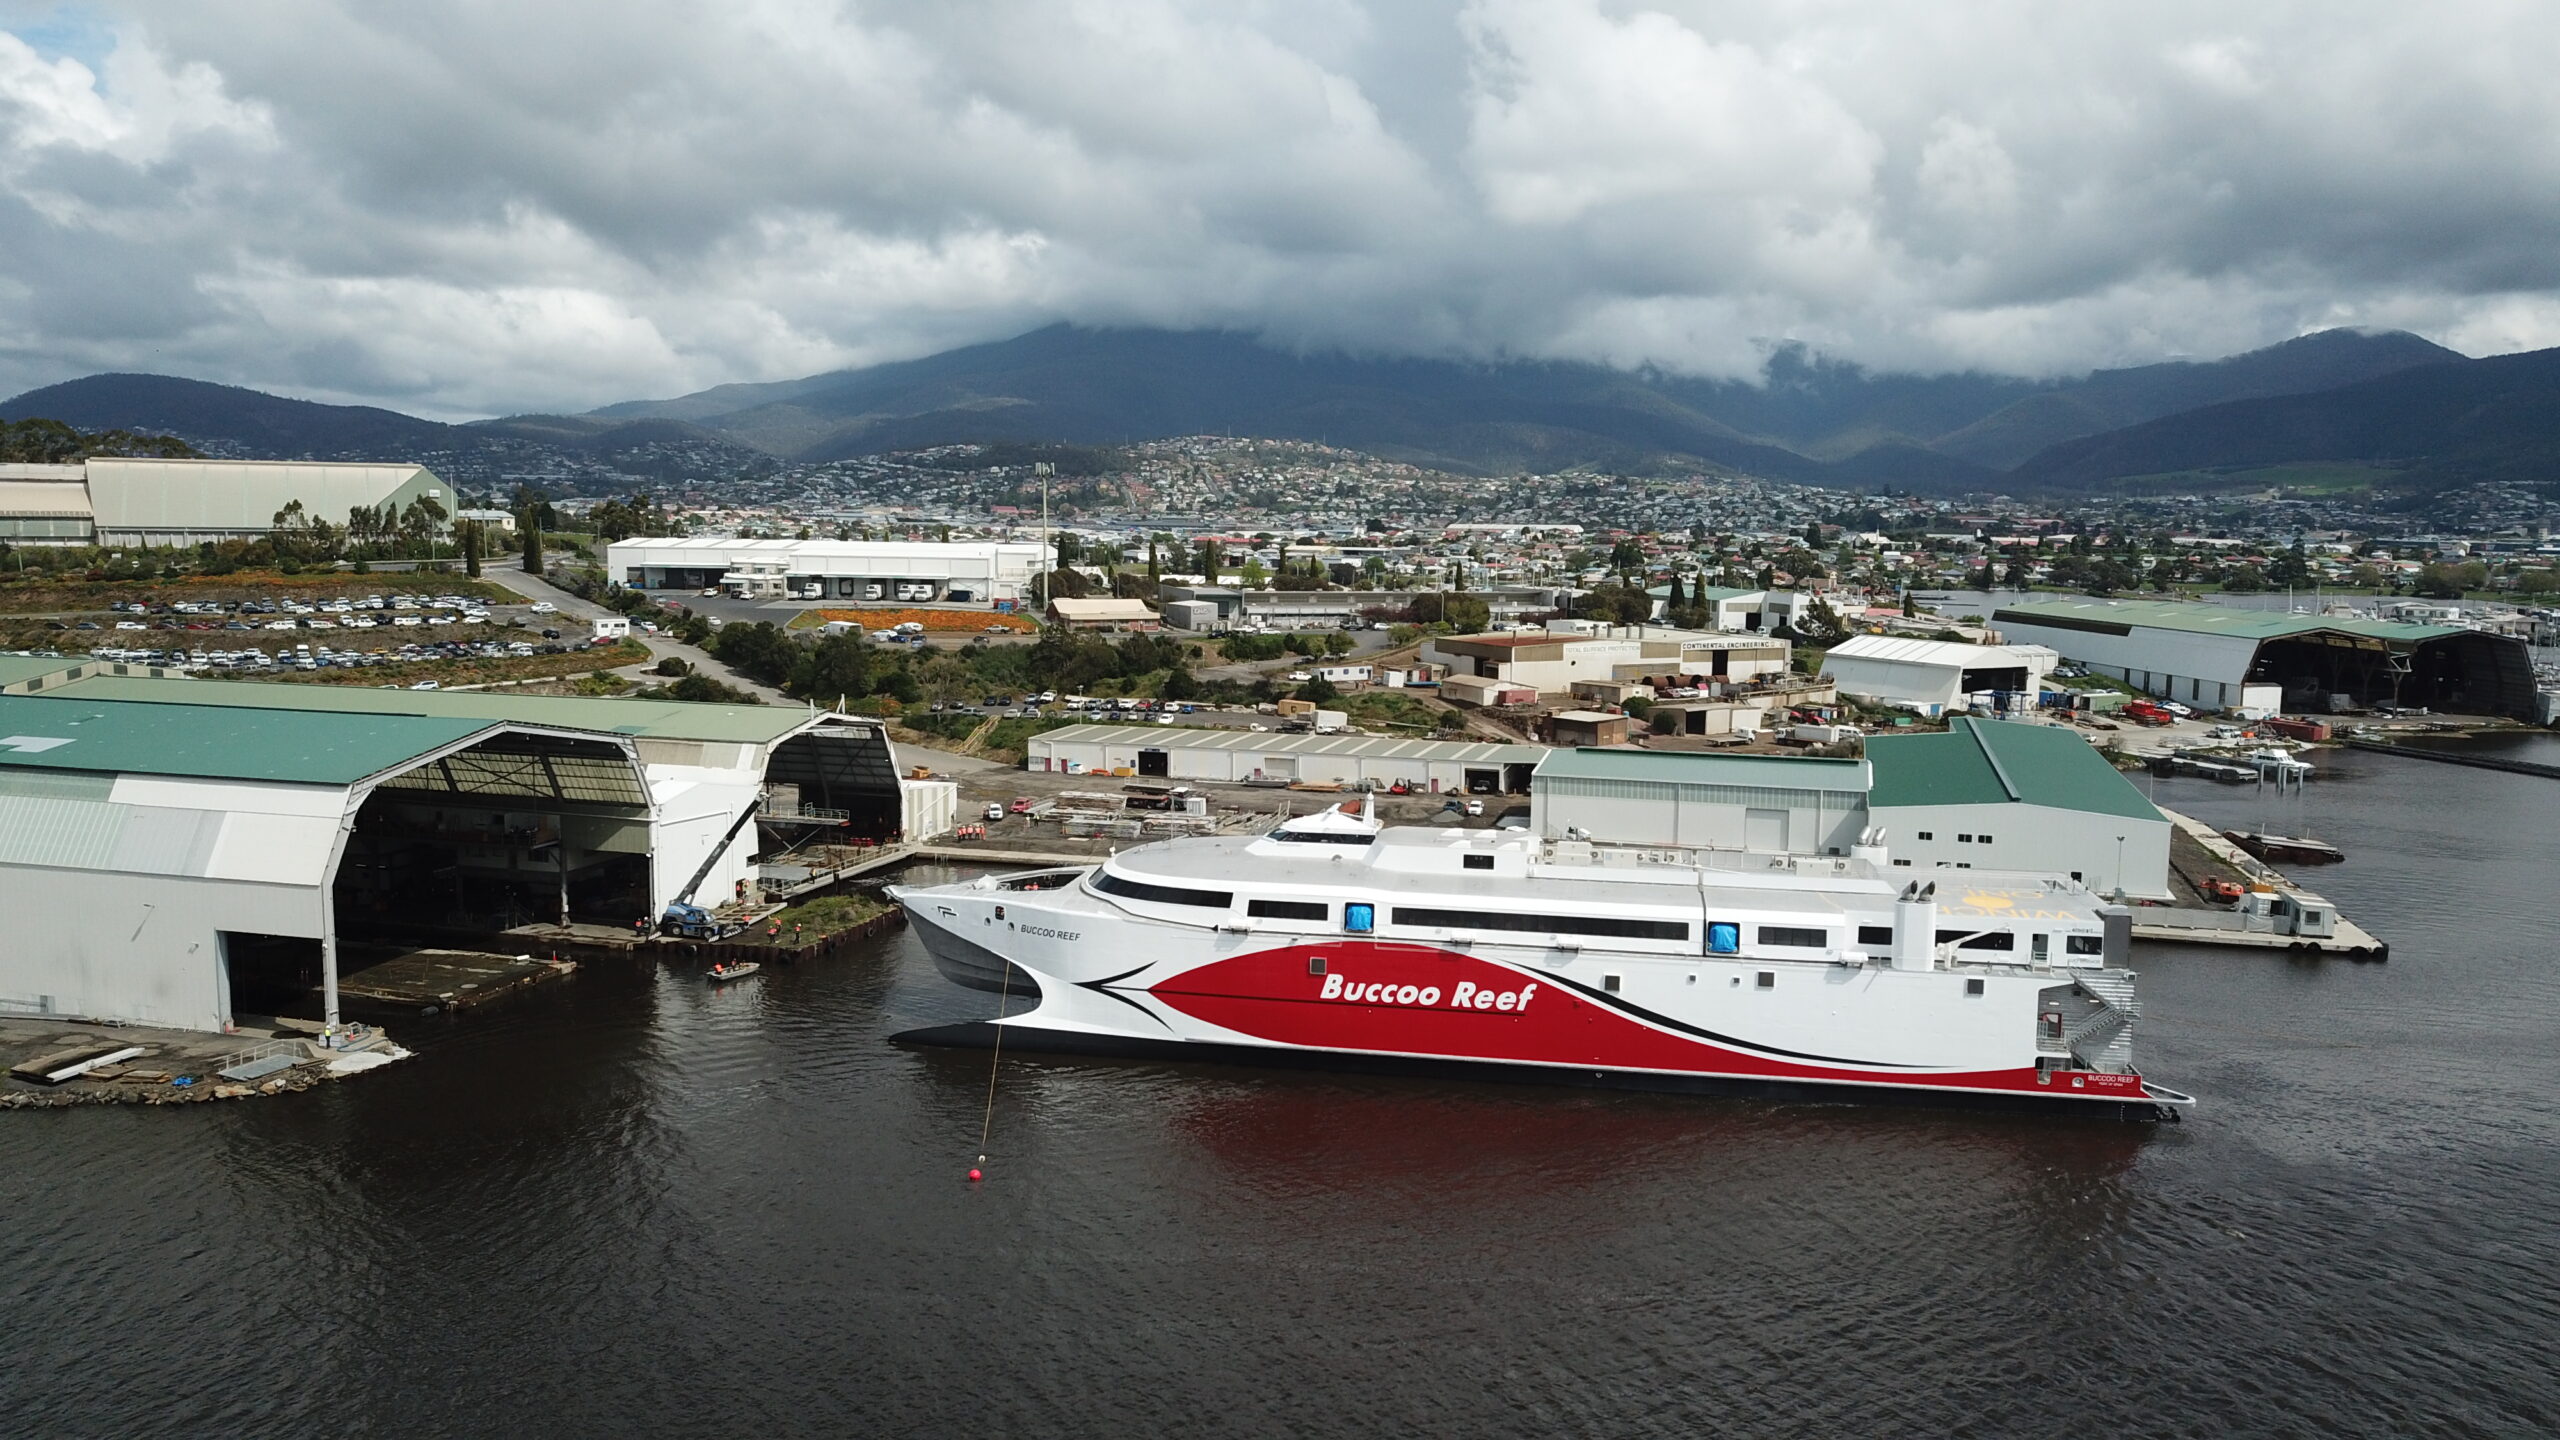 Incat Launches Ship for Trinidad and Tobago